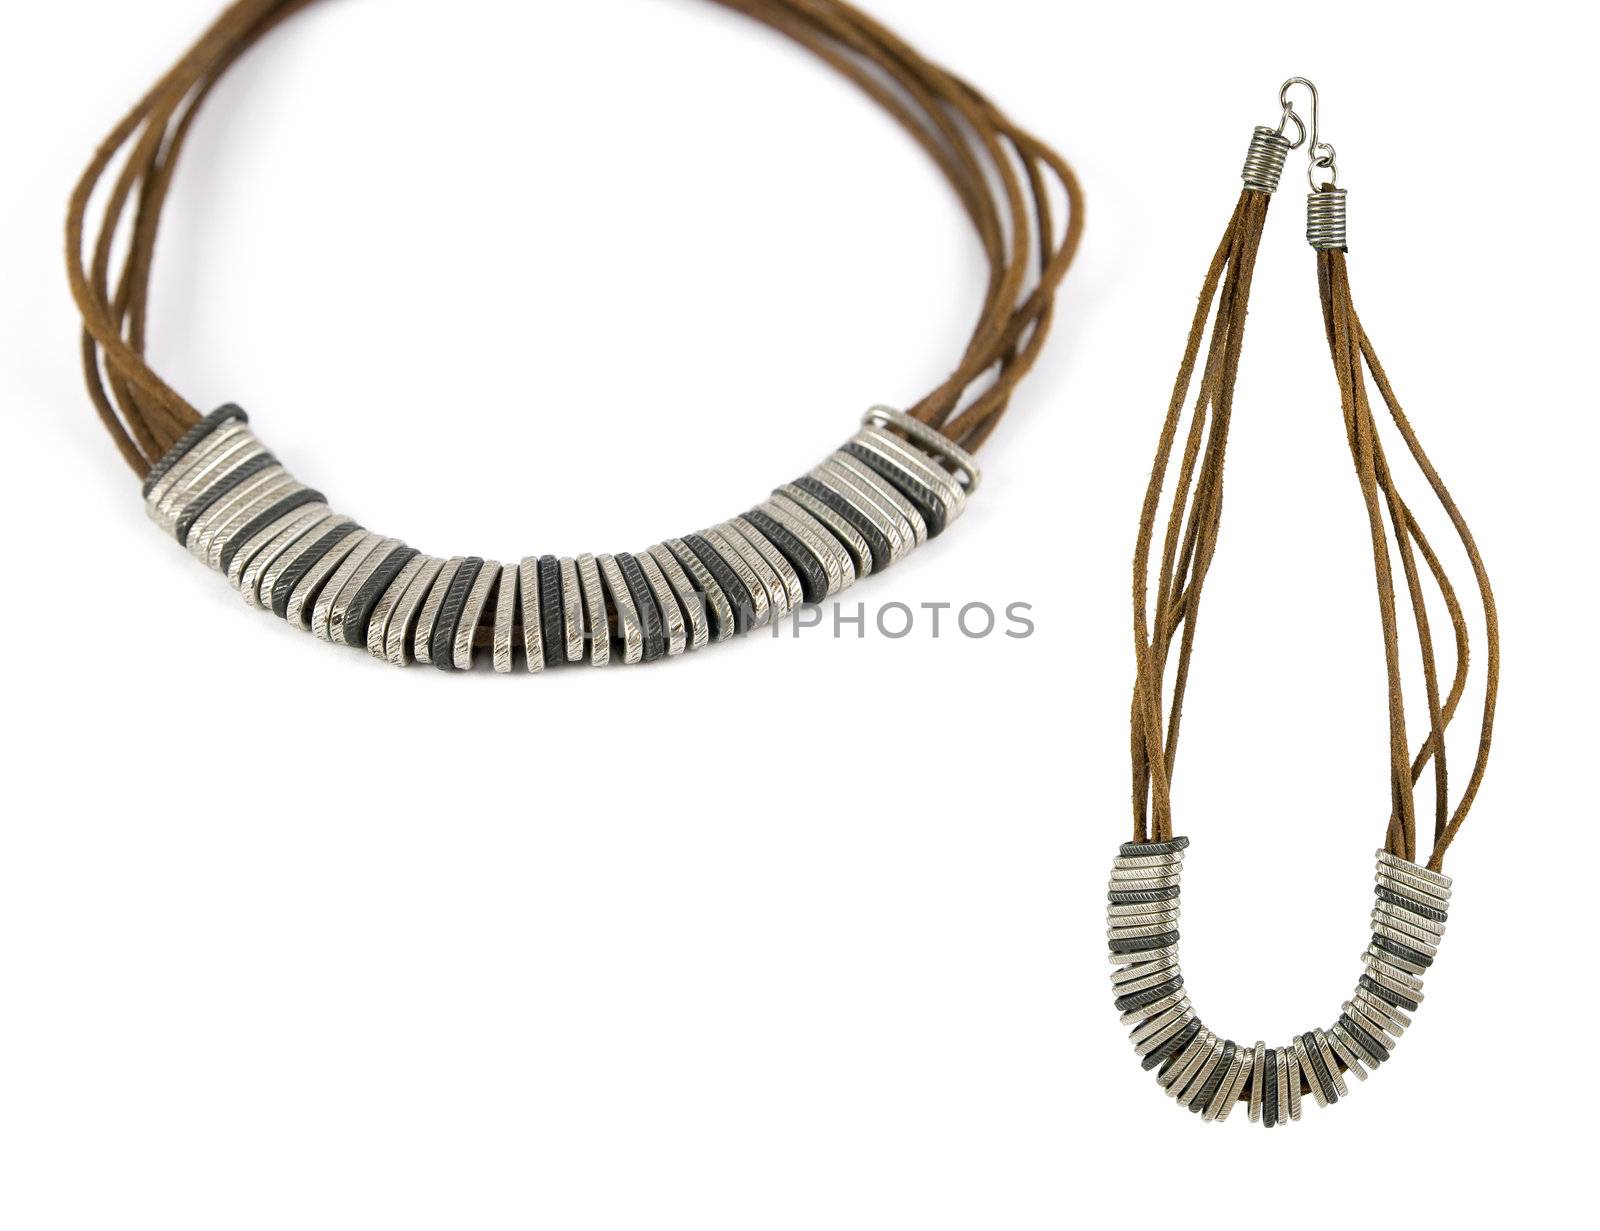 Leather & Metal Necklace by newt96